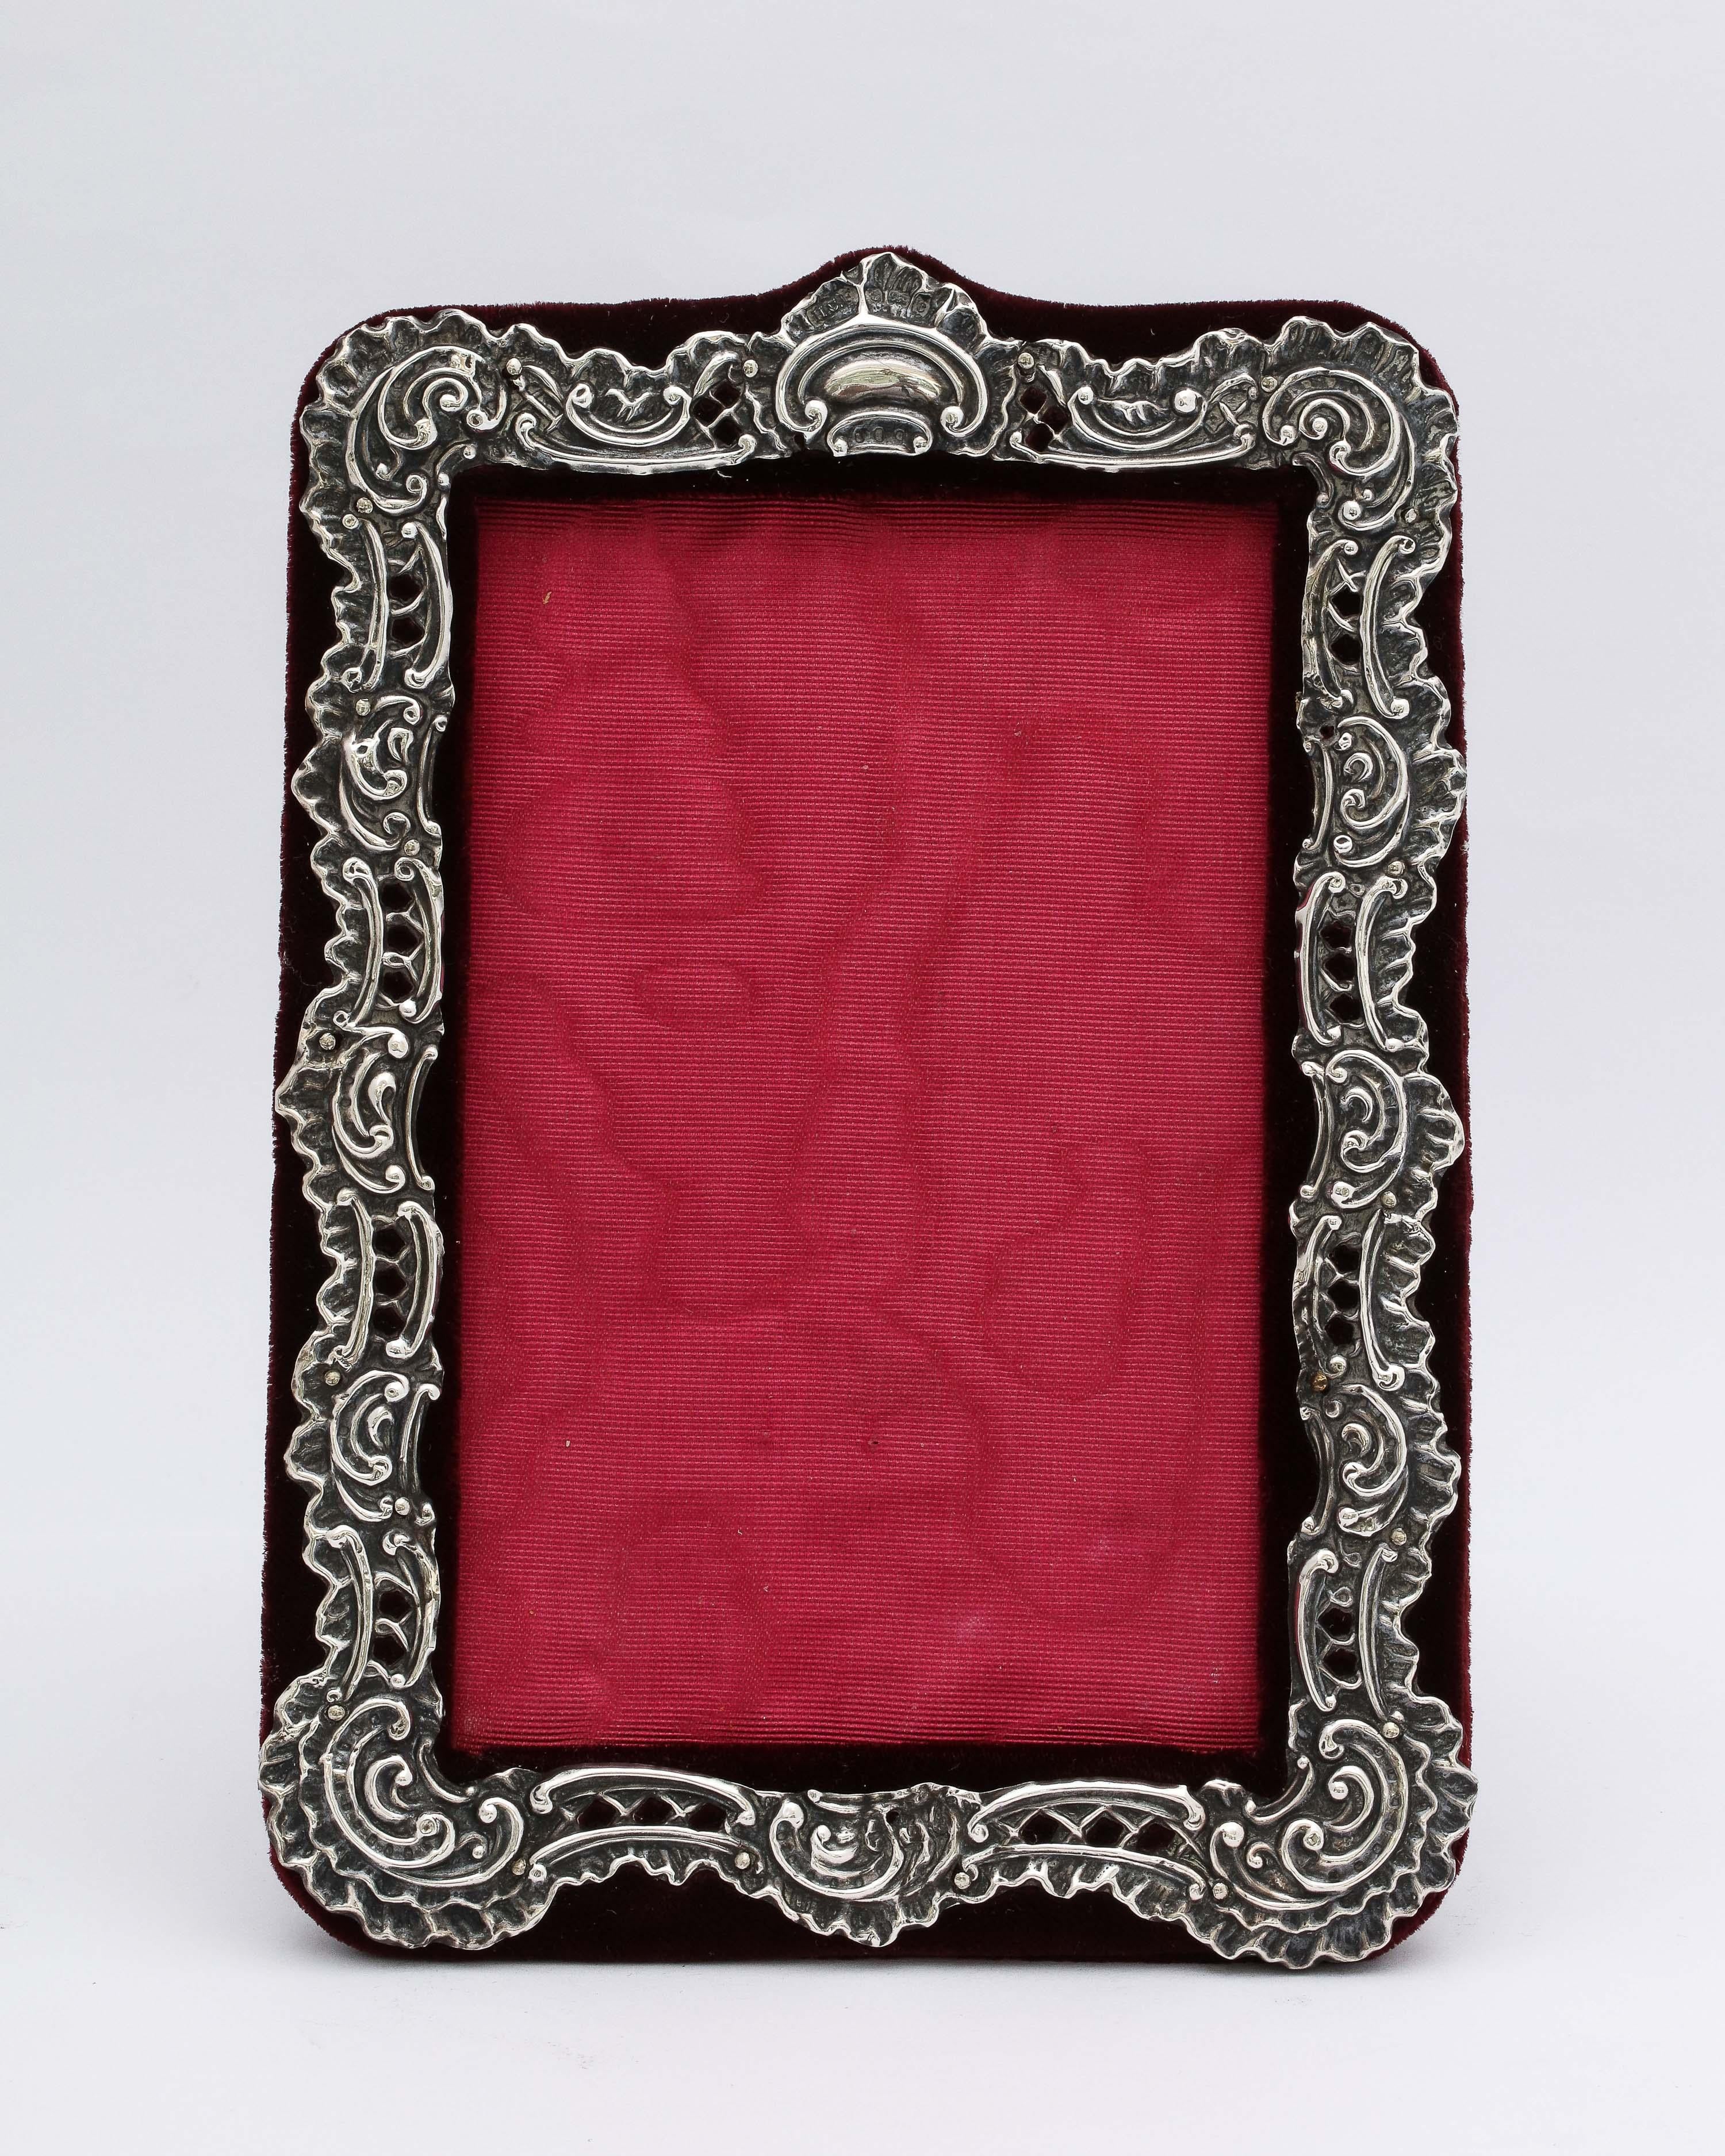 Edwardian Period sterling silver picture frame (in the Victorian style), Birmingham, England, year-hallmarked for 1902, Charles Henry Freeman - maker. Sterling silver is pierced and mounted on burgundy velvet. The piercing allows the velvet to show